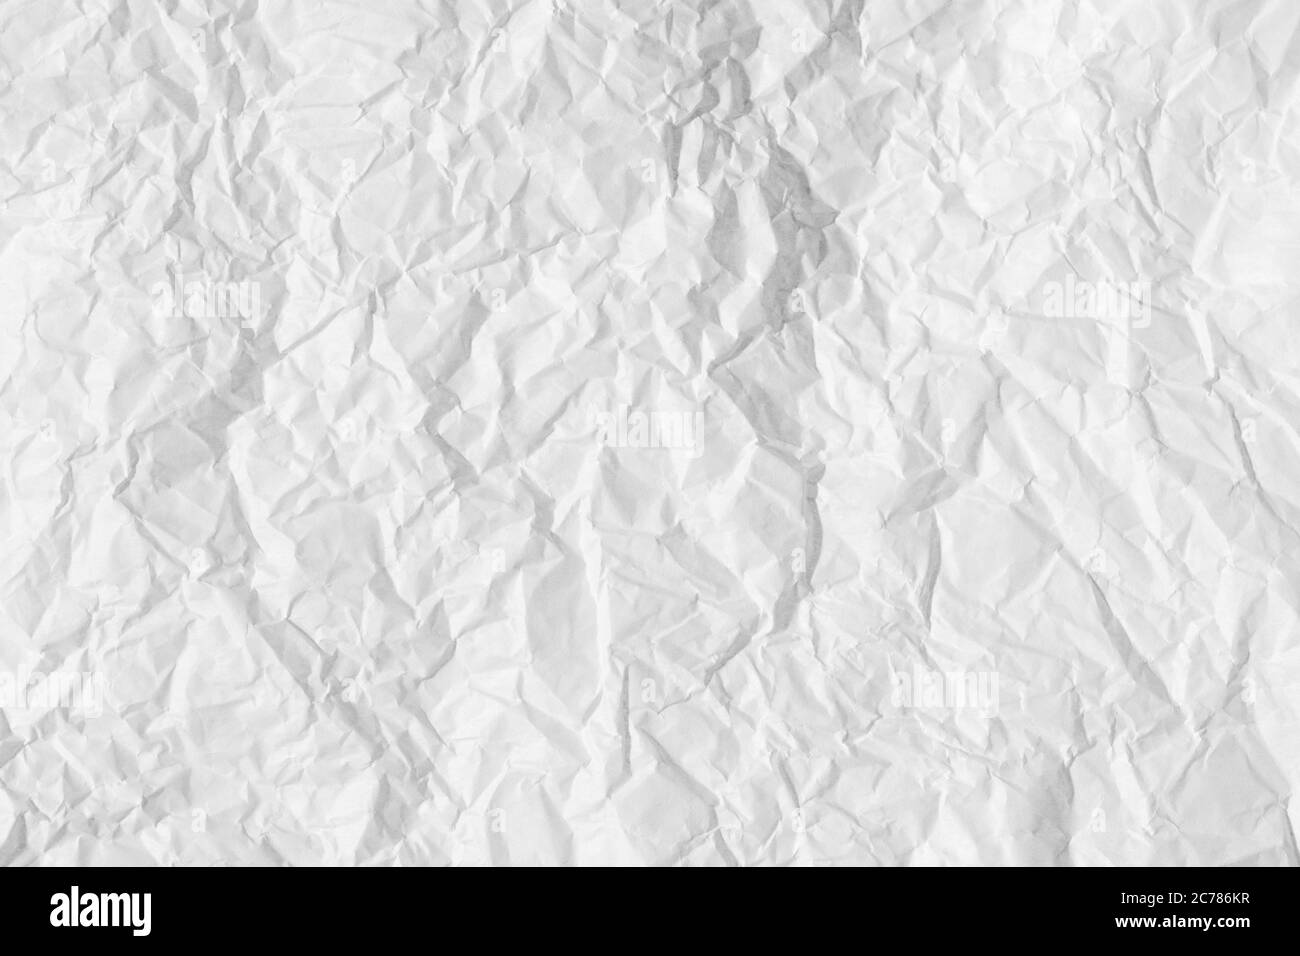 https://c8.alamy.com/comp/2C786KR/texture-of-crumpled-white-parchment-or-paper-abstract-background-for-design-blank-with-copy-space-for-a-text-2C786KR.jpg